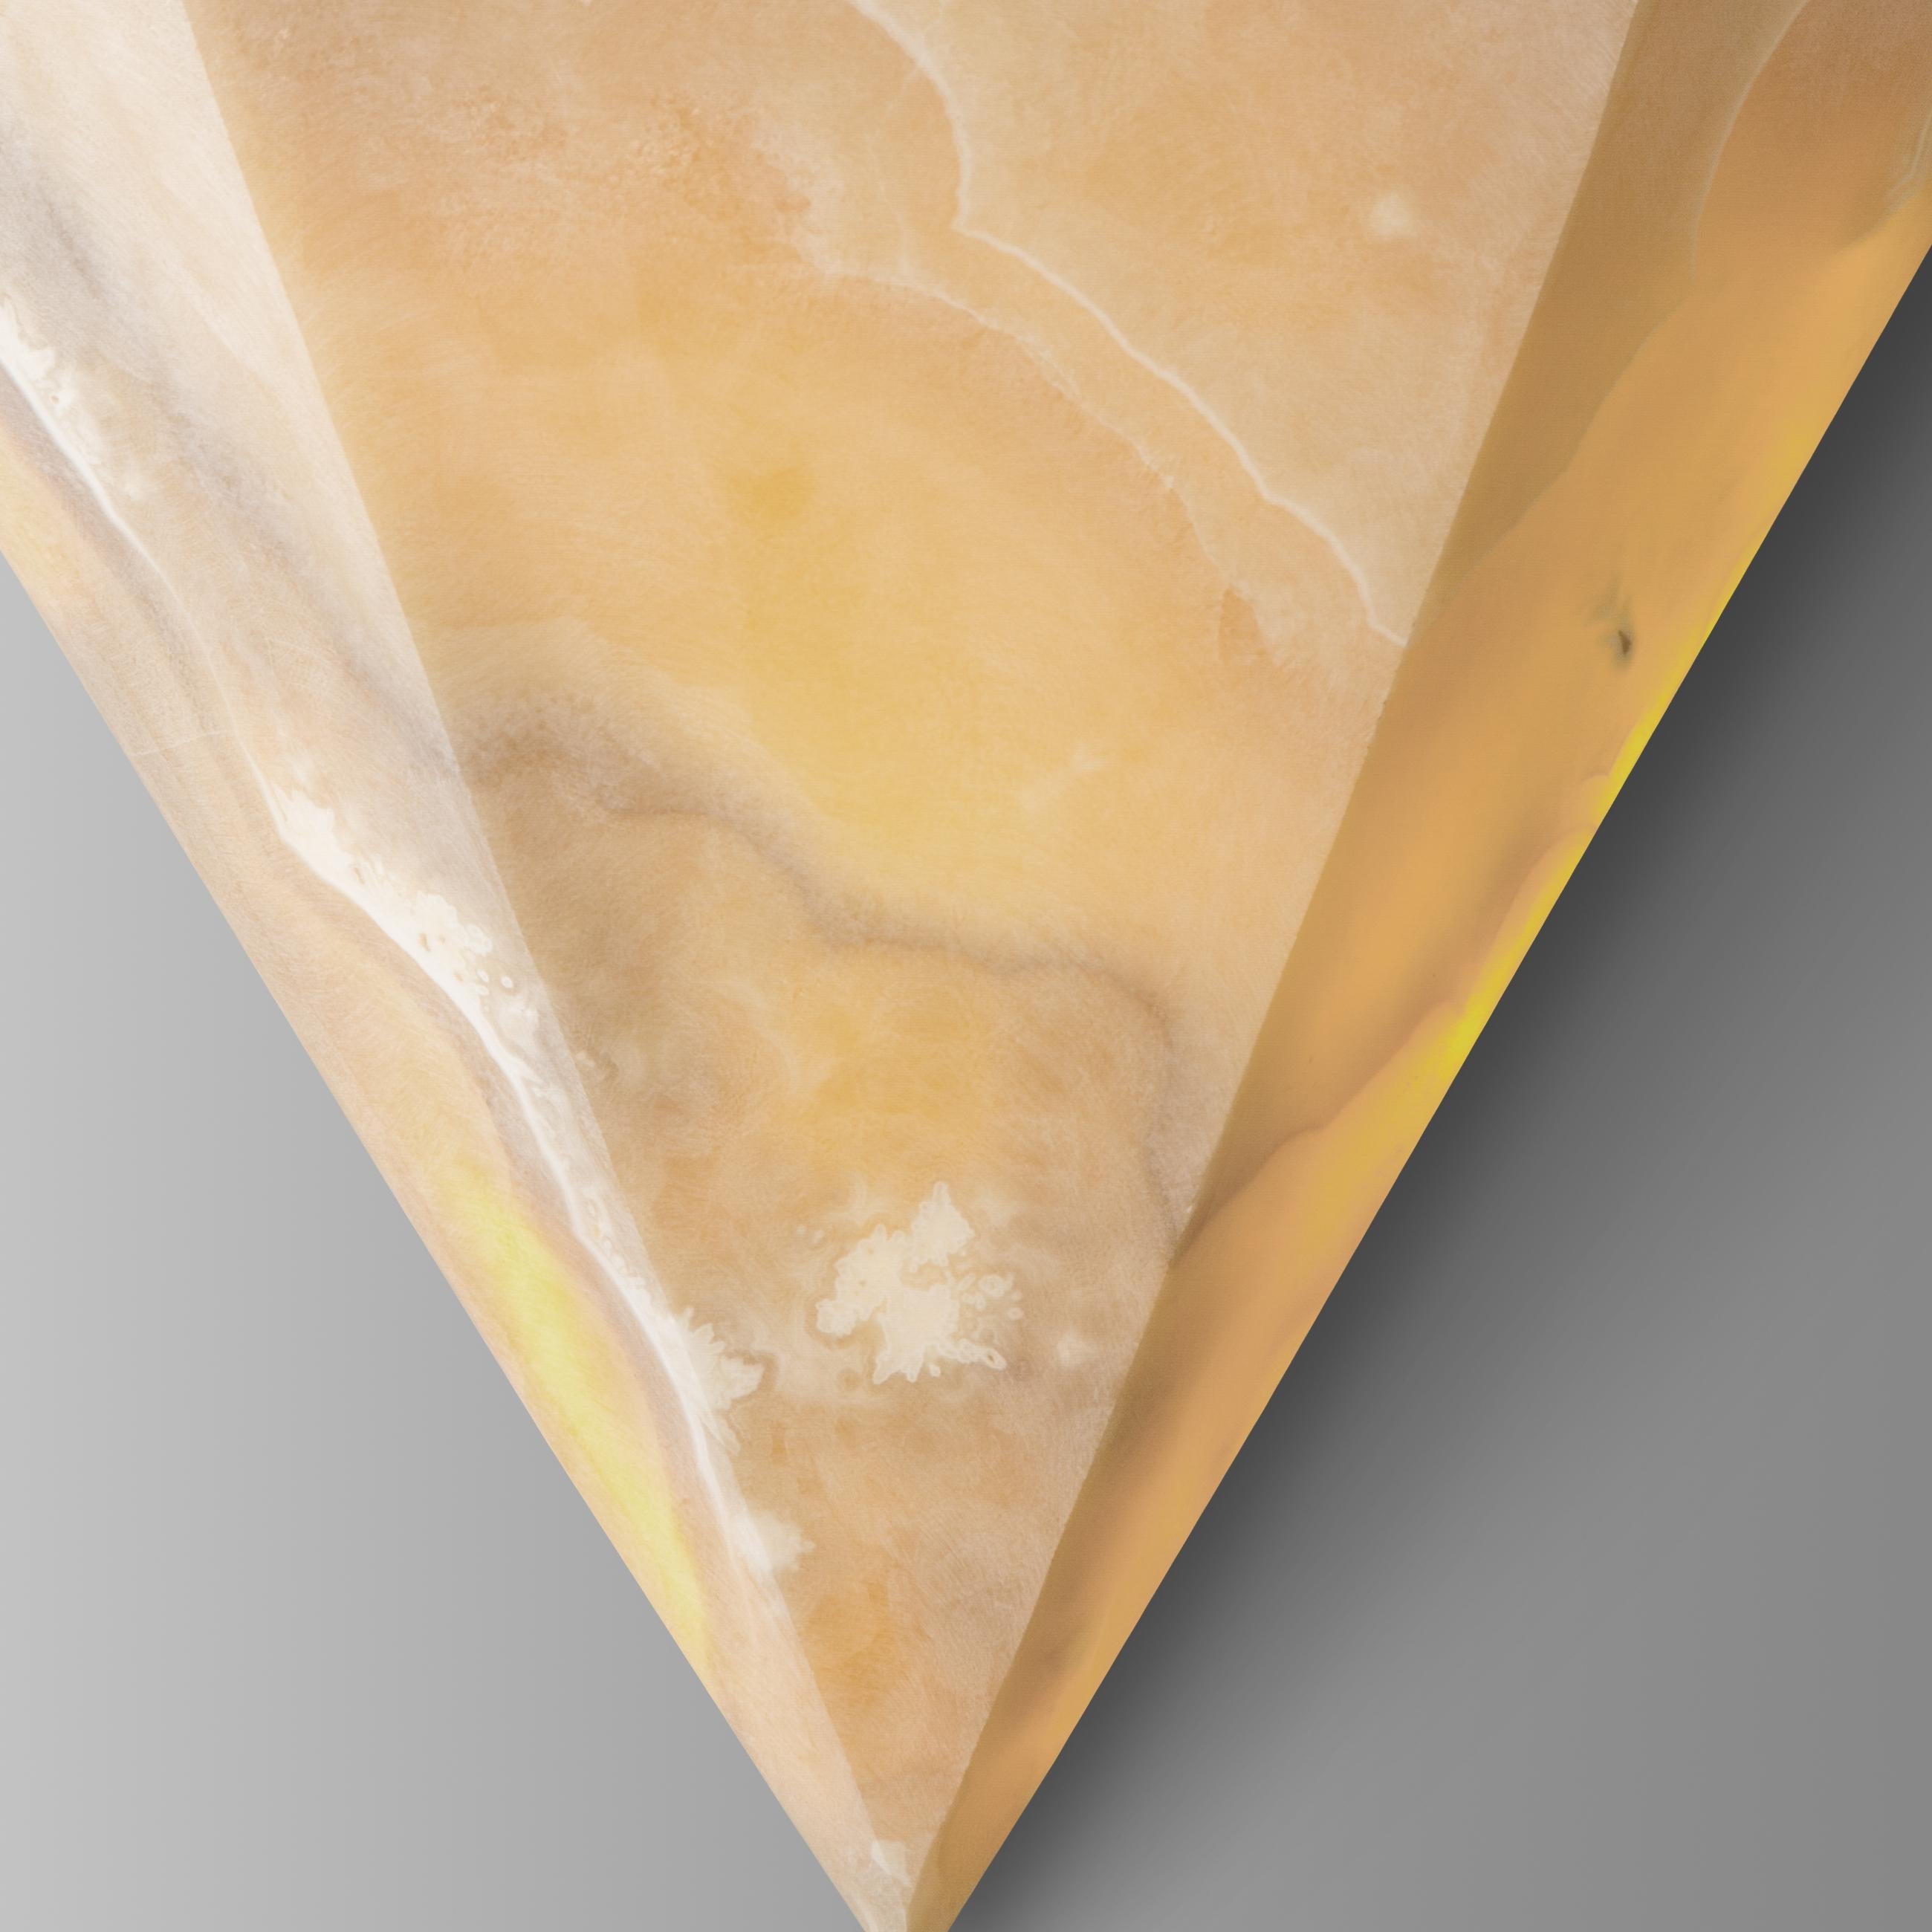 Diamond I - Alabaster sconce sculpted by Omar Chakil
“DIAMOND SHIELD i” Sconce -Raw Massive Egyptian Alabaster
Measure: Width 60cm x Height 70cm
Limited Edition of 12
Numbered and Signed

Omar Chakil

French Egyptian Lebanese former singer